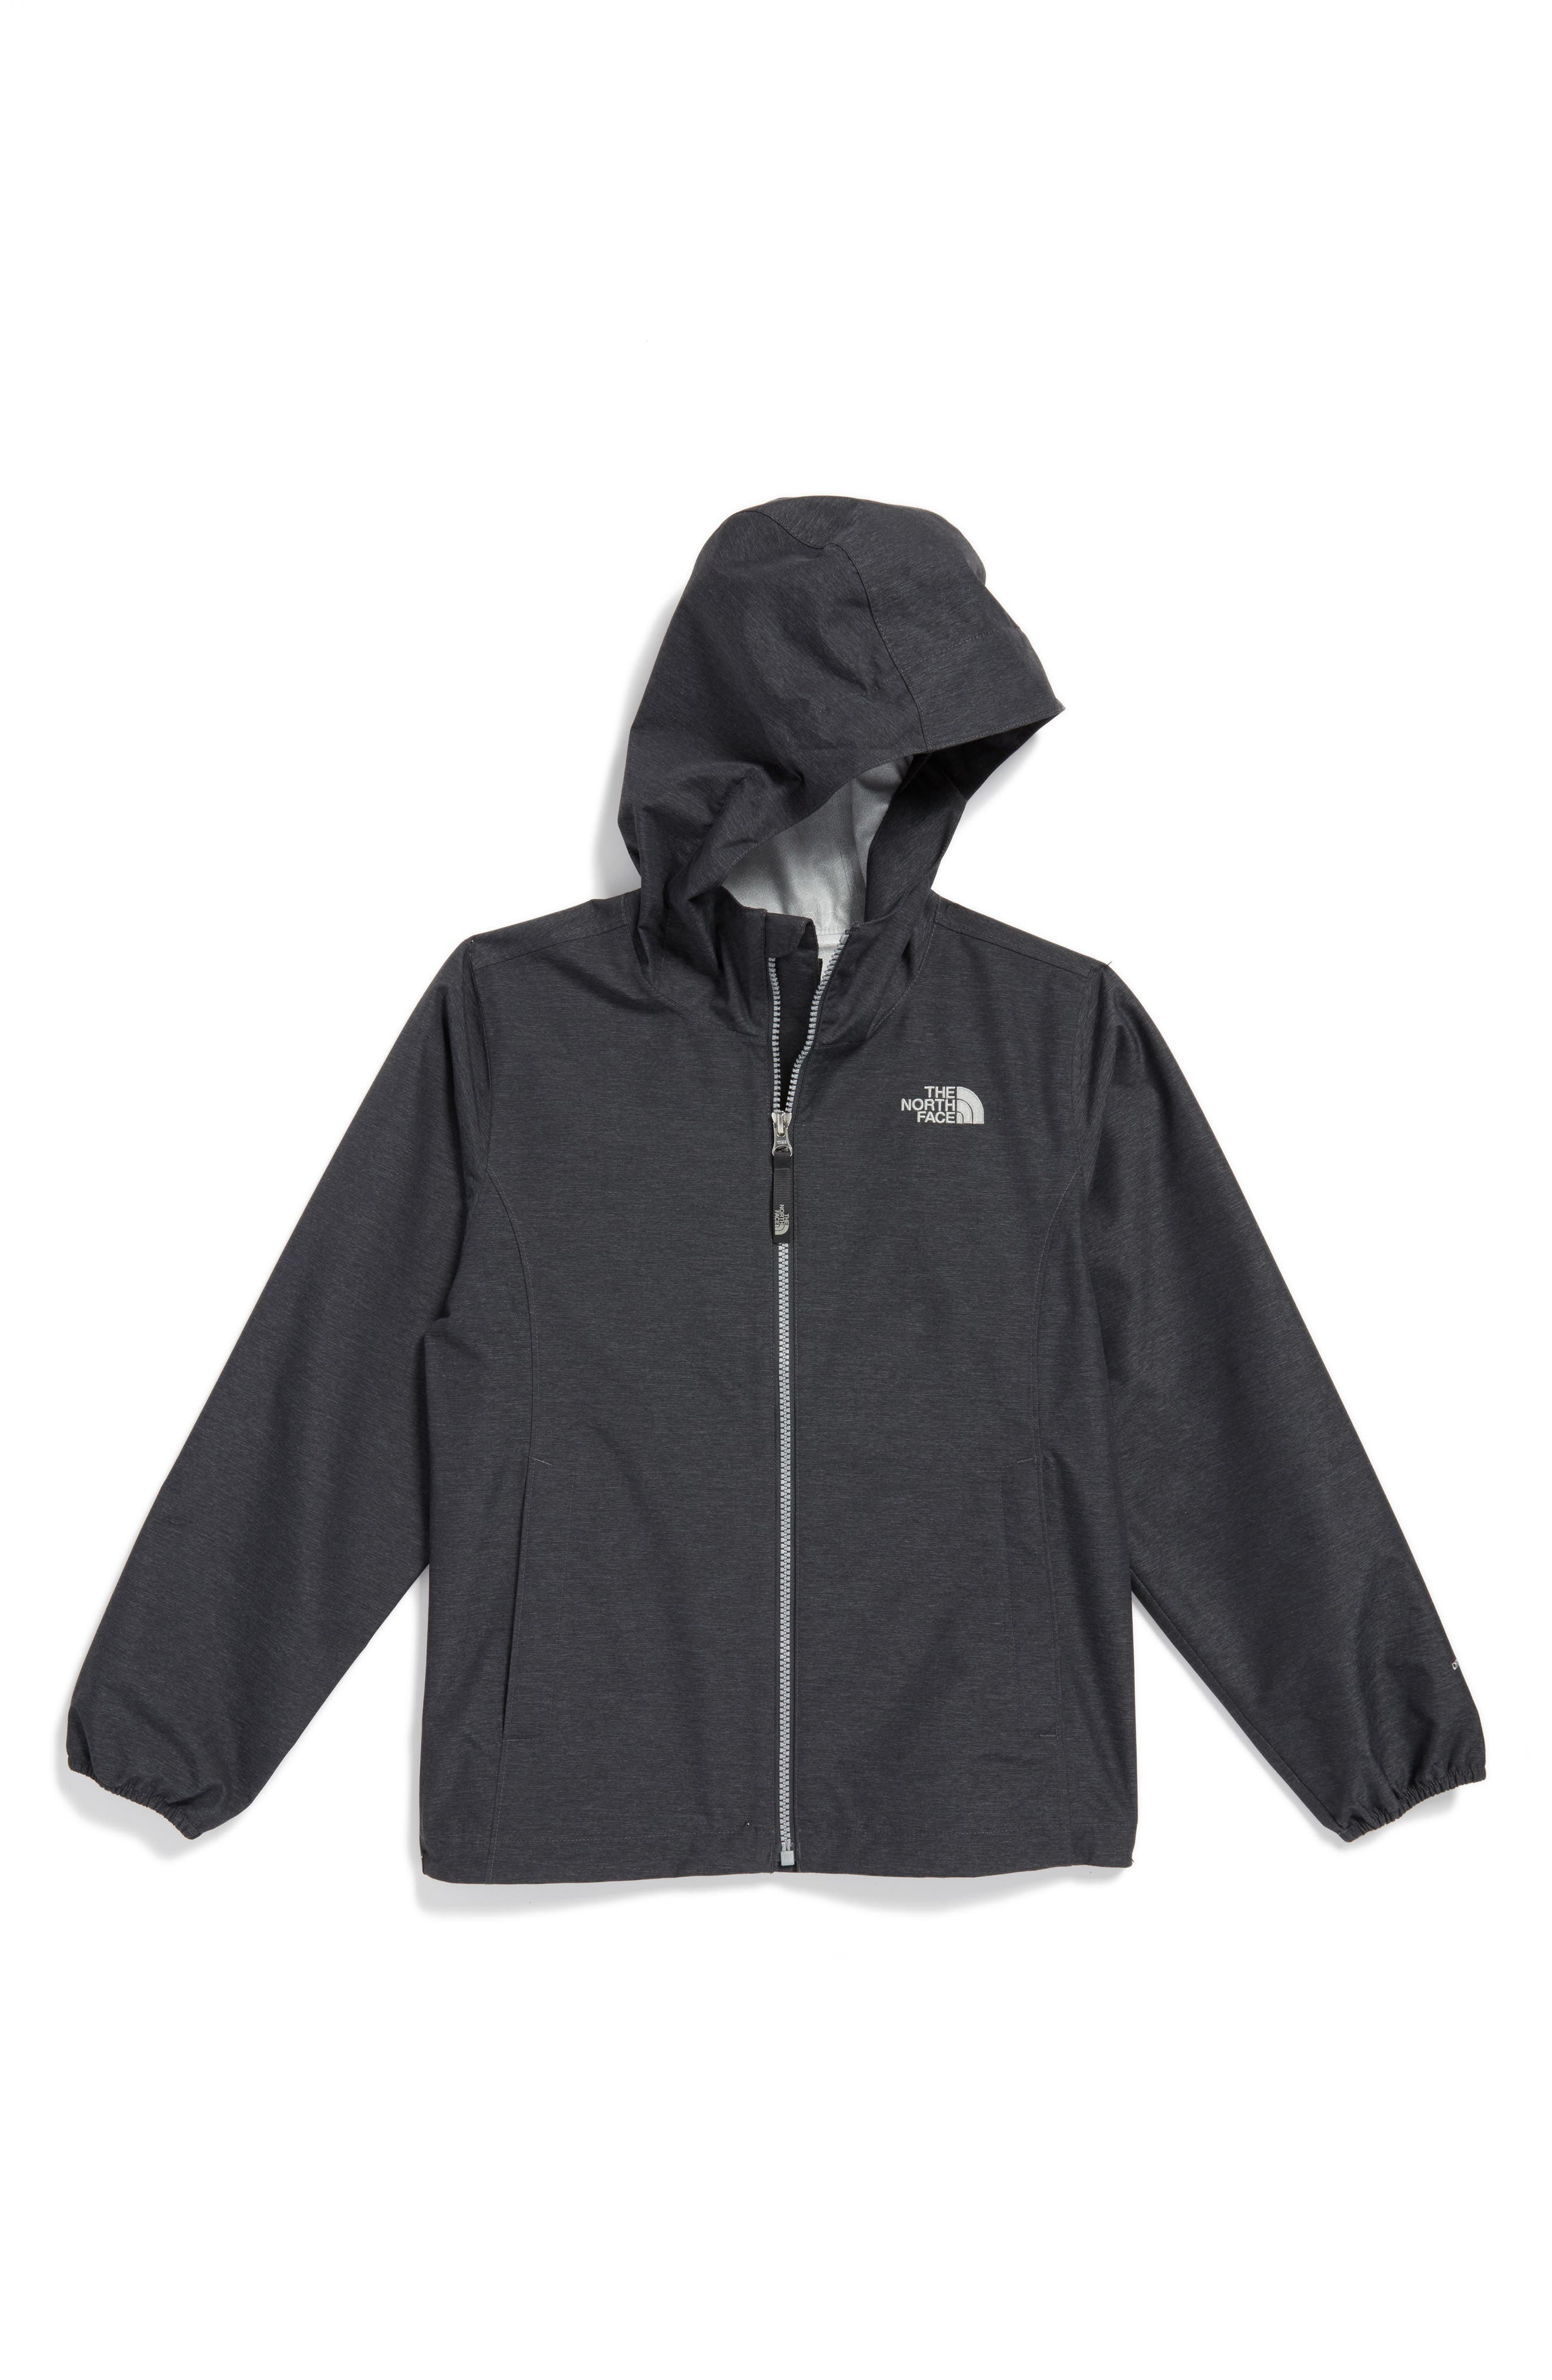 north face hyvent jacket waterproof